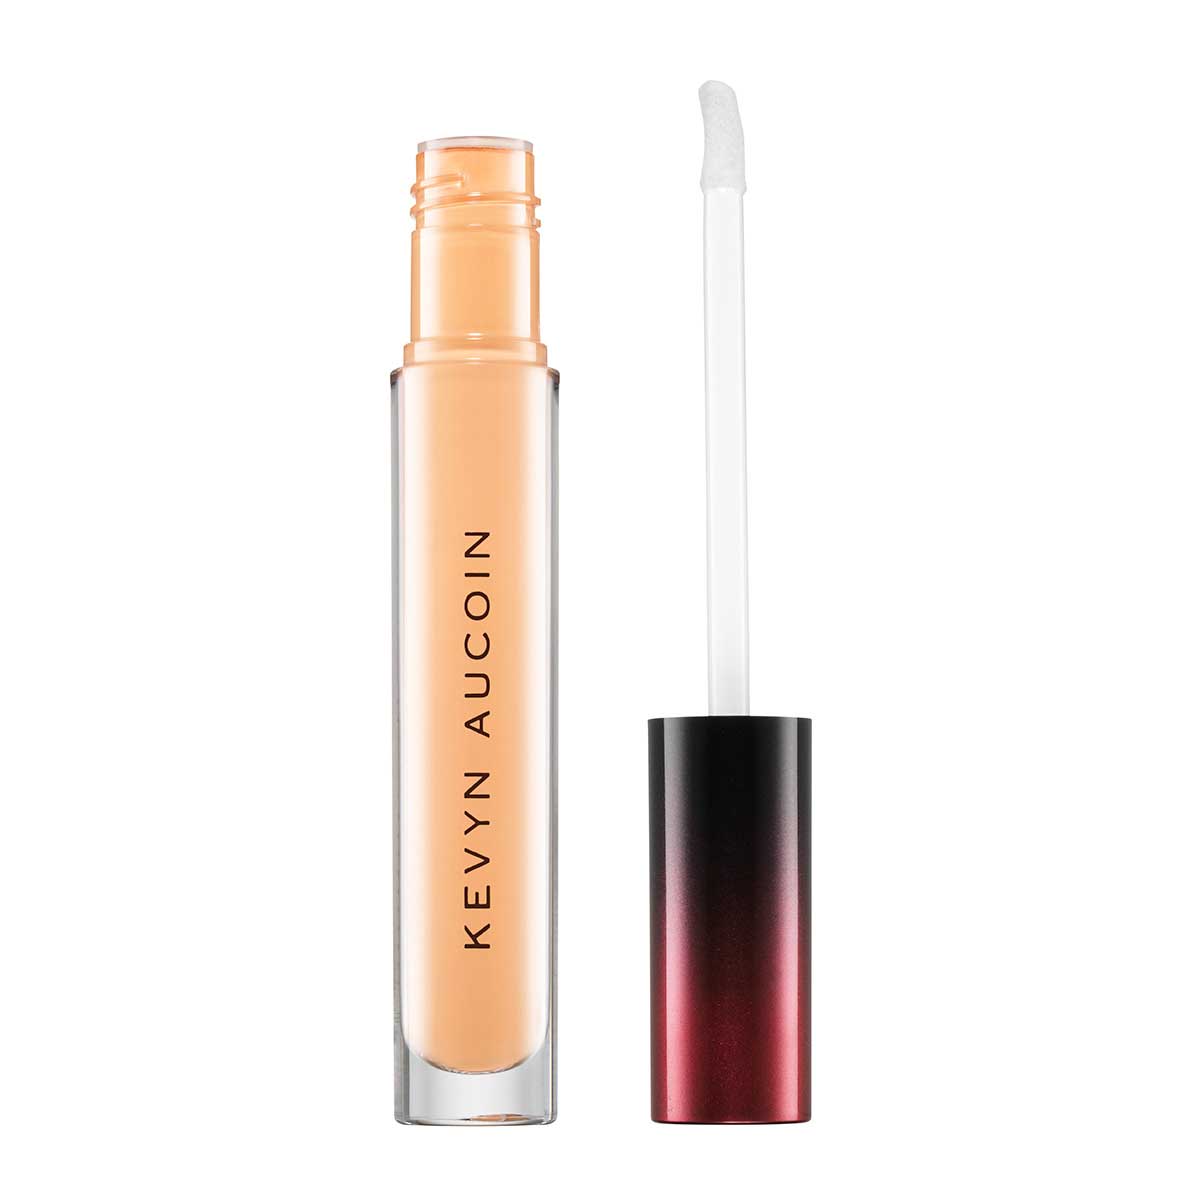 Kevyn Aucoin The Etherealist Super Natural Concealer - Corrector